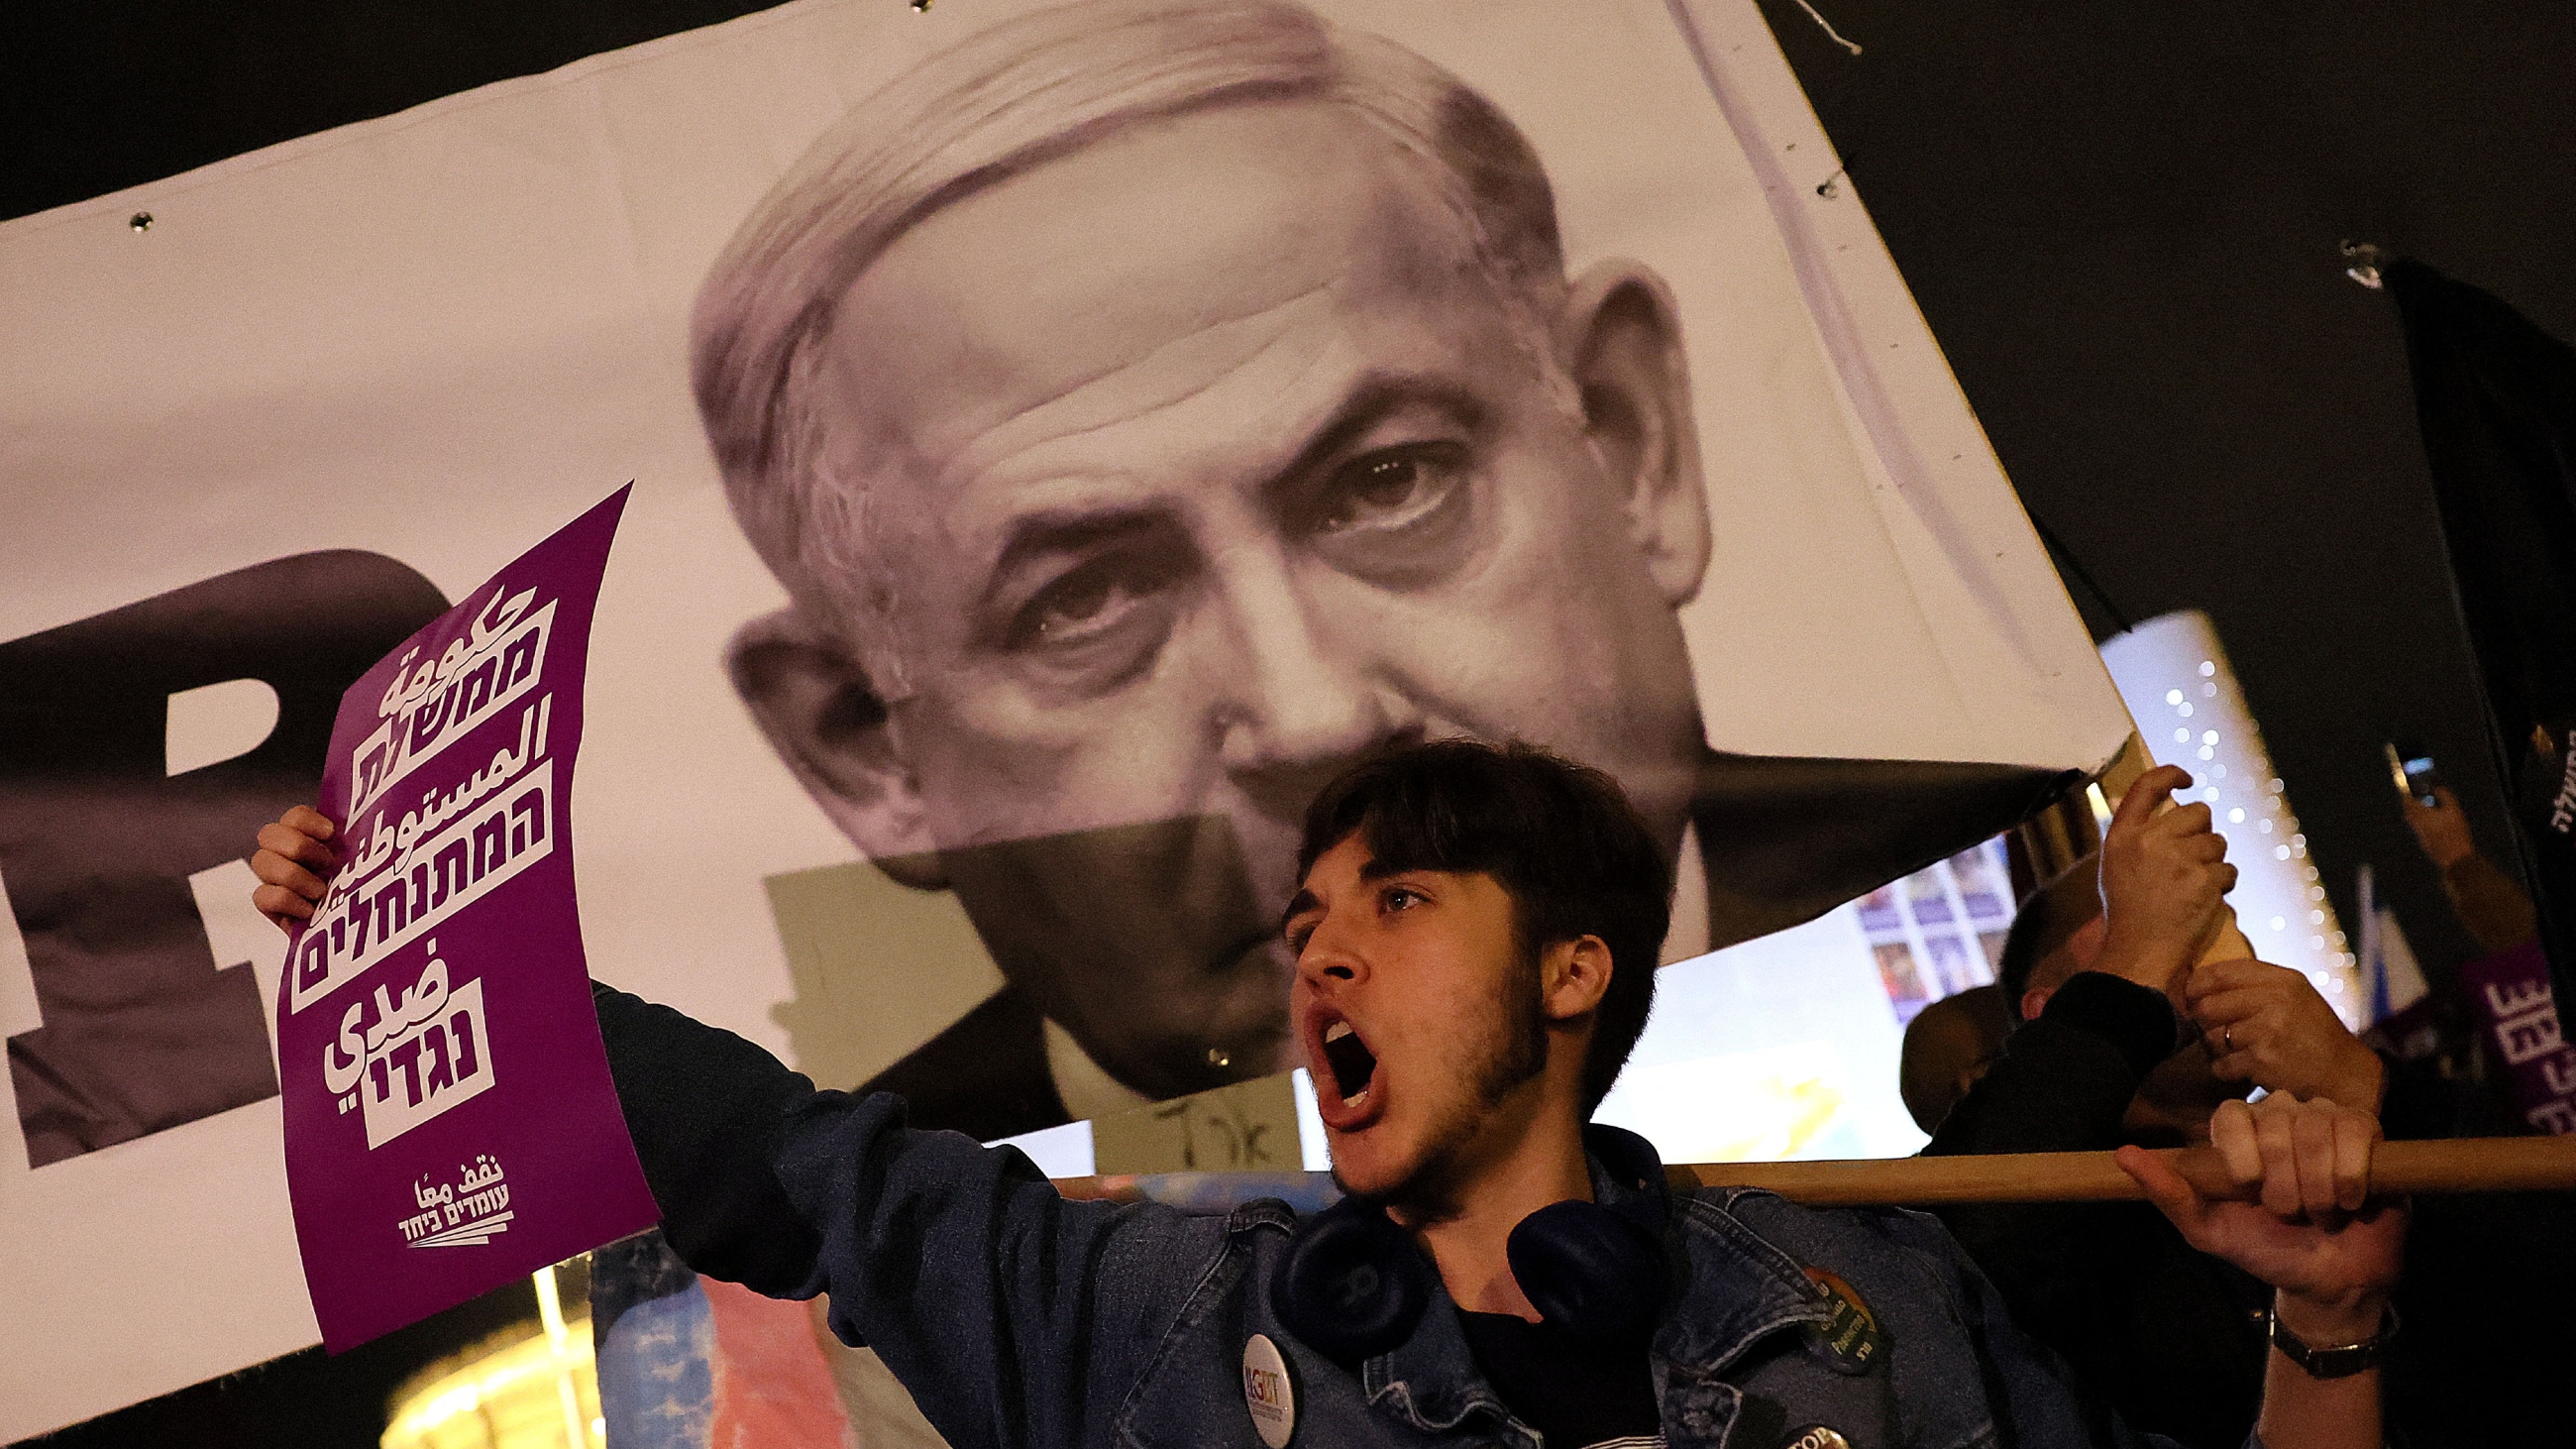 Israeli left wing protesters demonstrate against the new government led by Prime Minister Benjamin Netanyahu, on 7 January 2023 in Tel Aviv (AFP)